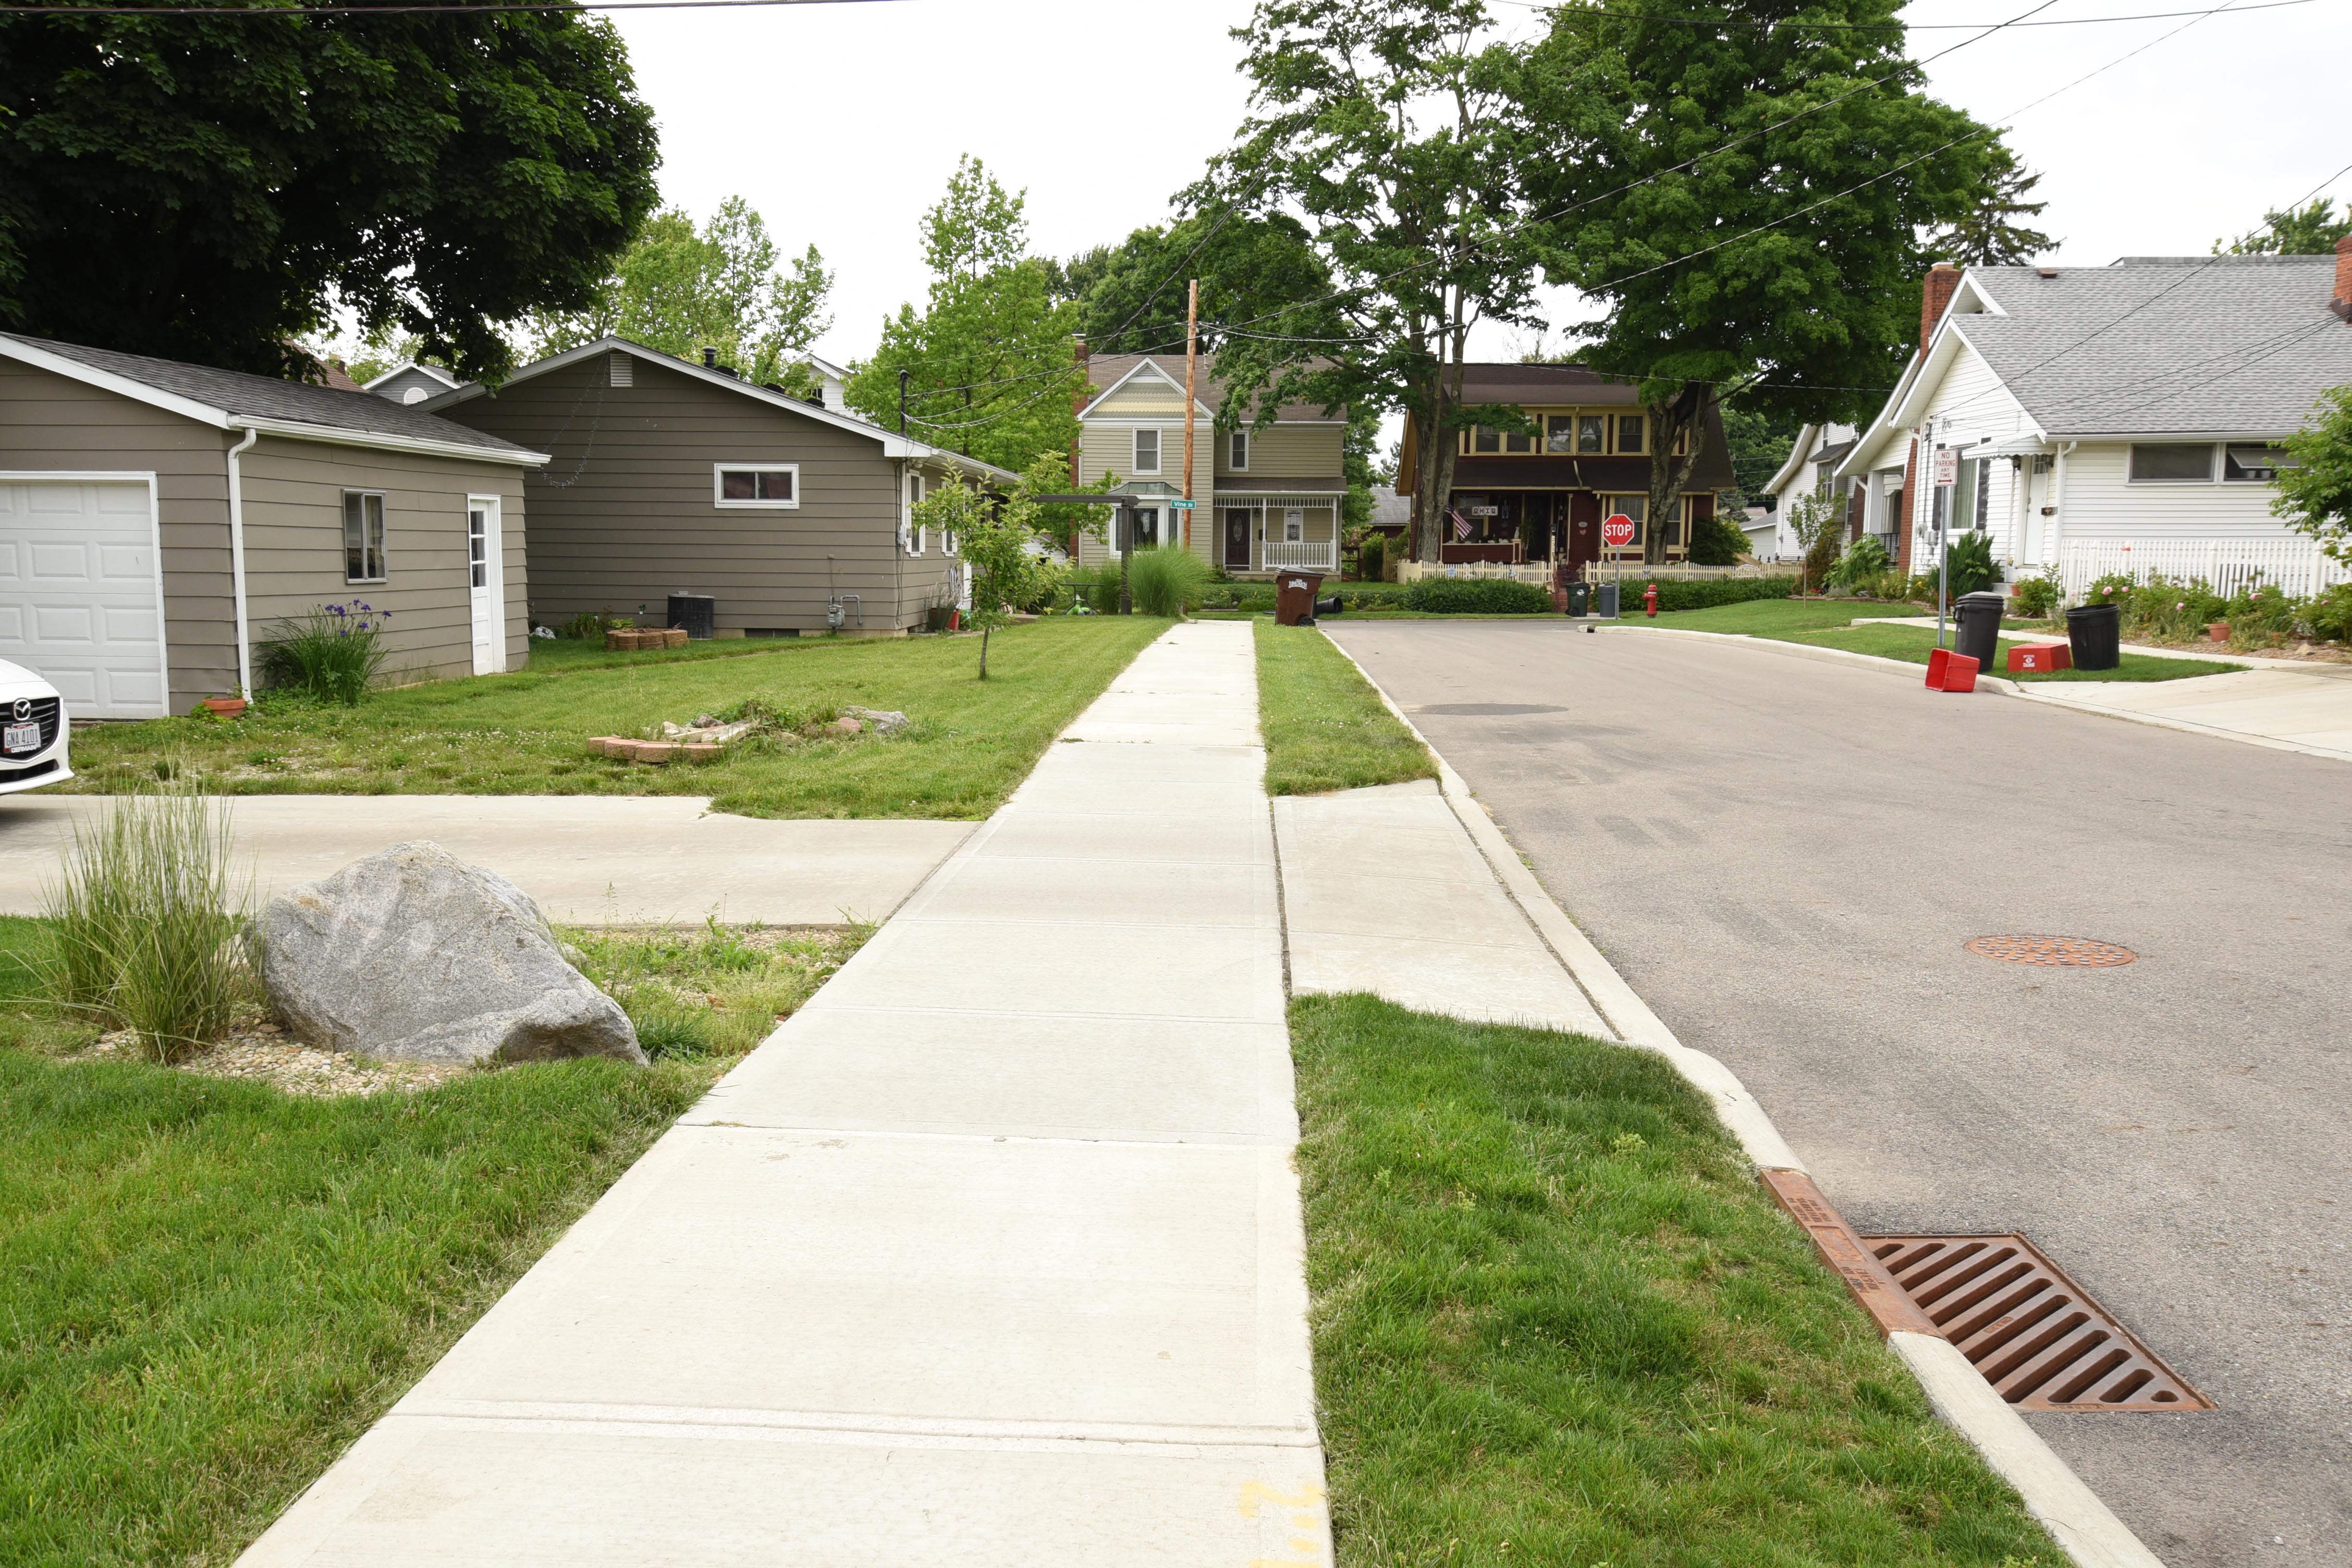 Westerville Heights Subdivision Rehabilitation